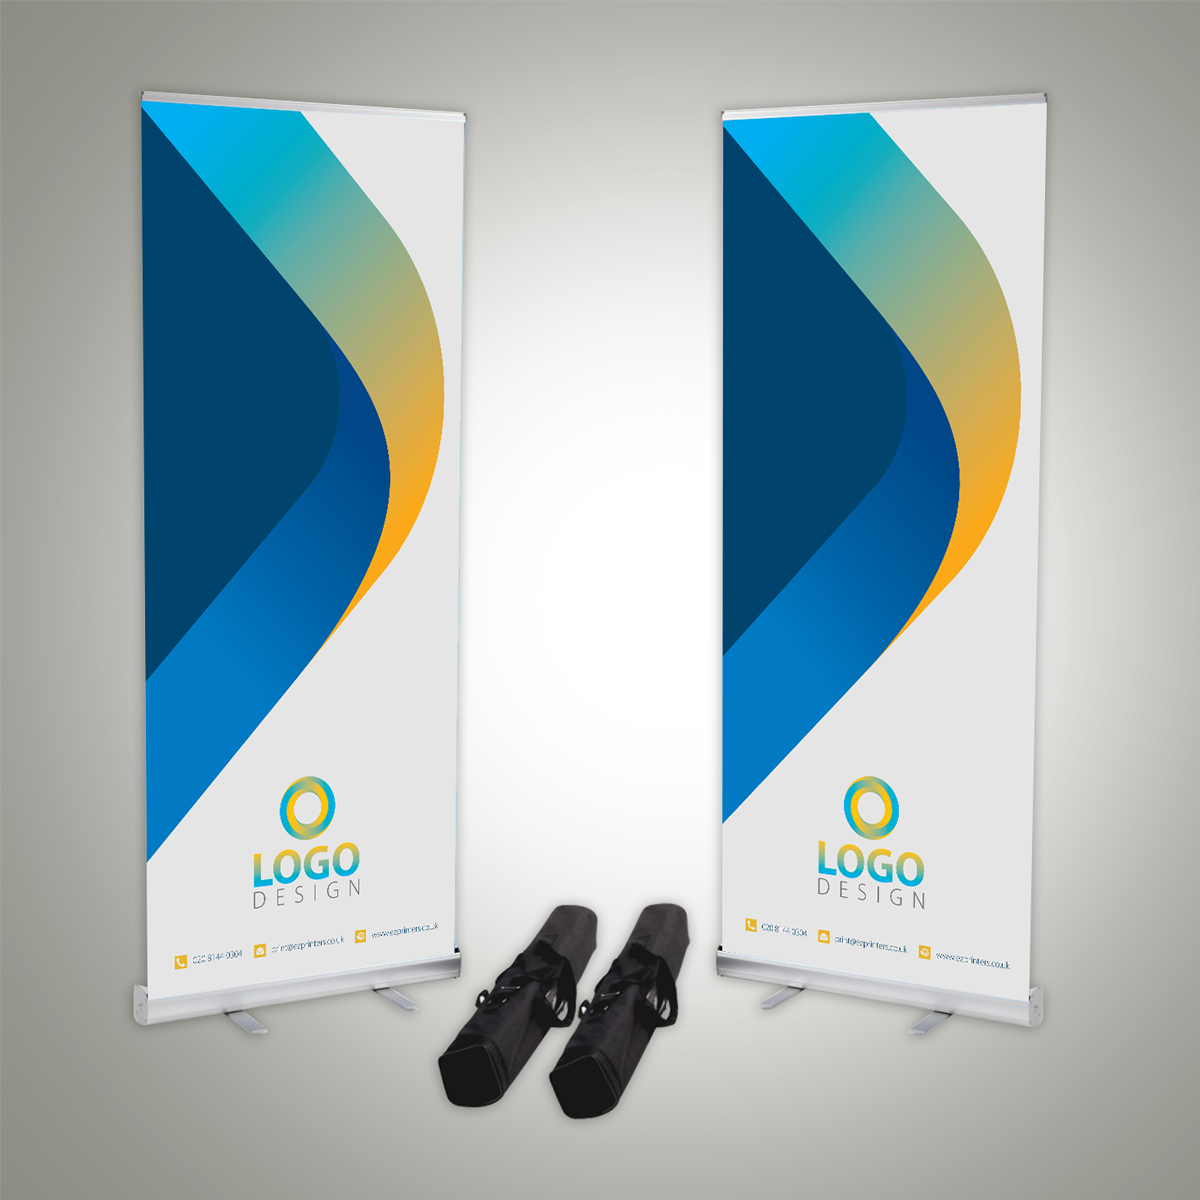 Standard Roller Banners Roll Up Banners Pop Up Banners 